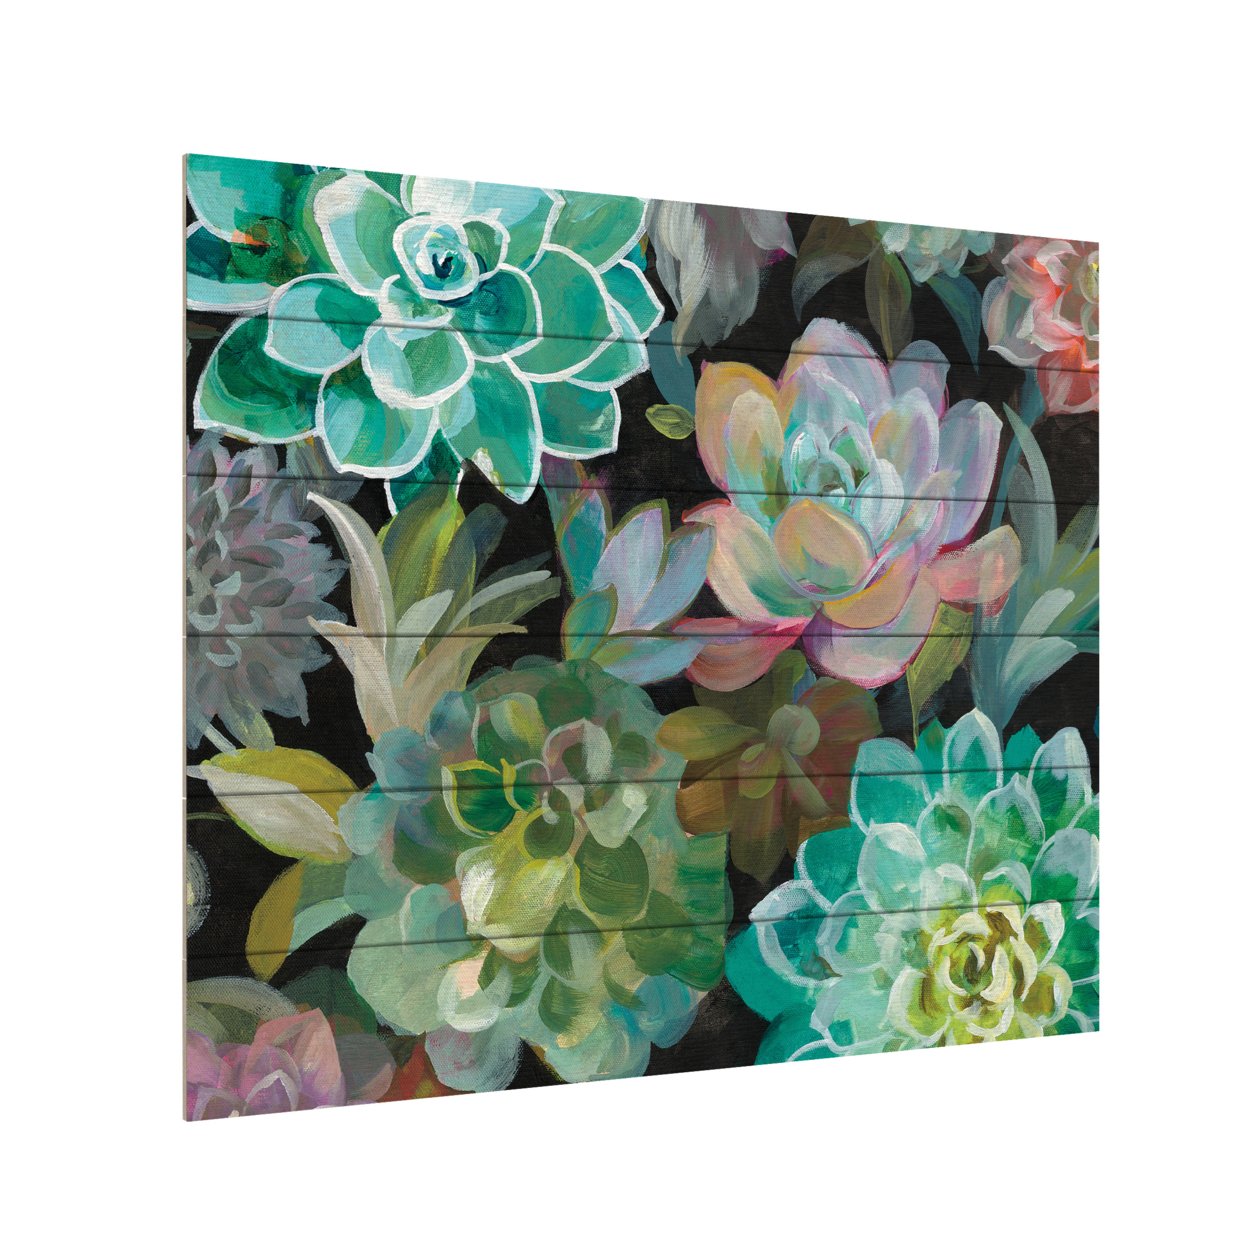 Wooden Slat Art 18 X 22 Inches Titled Floral Succulents V2 Crop Ready To Hang Home Decor Picture